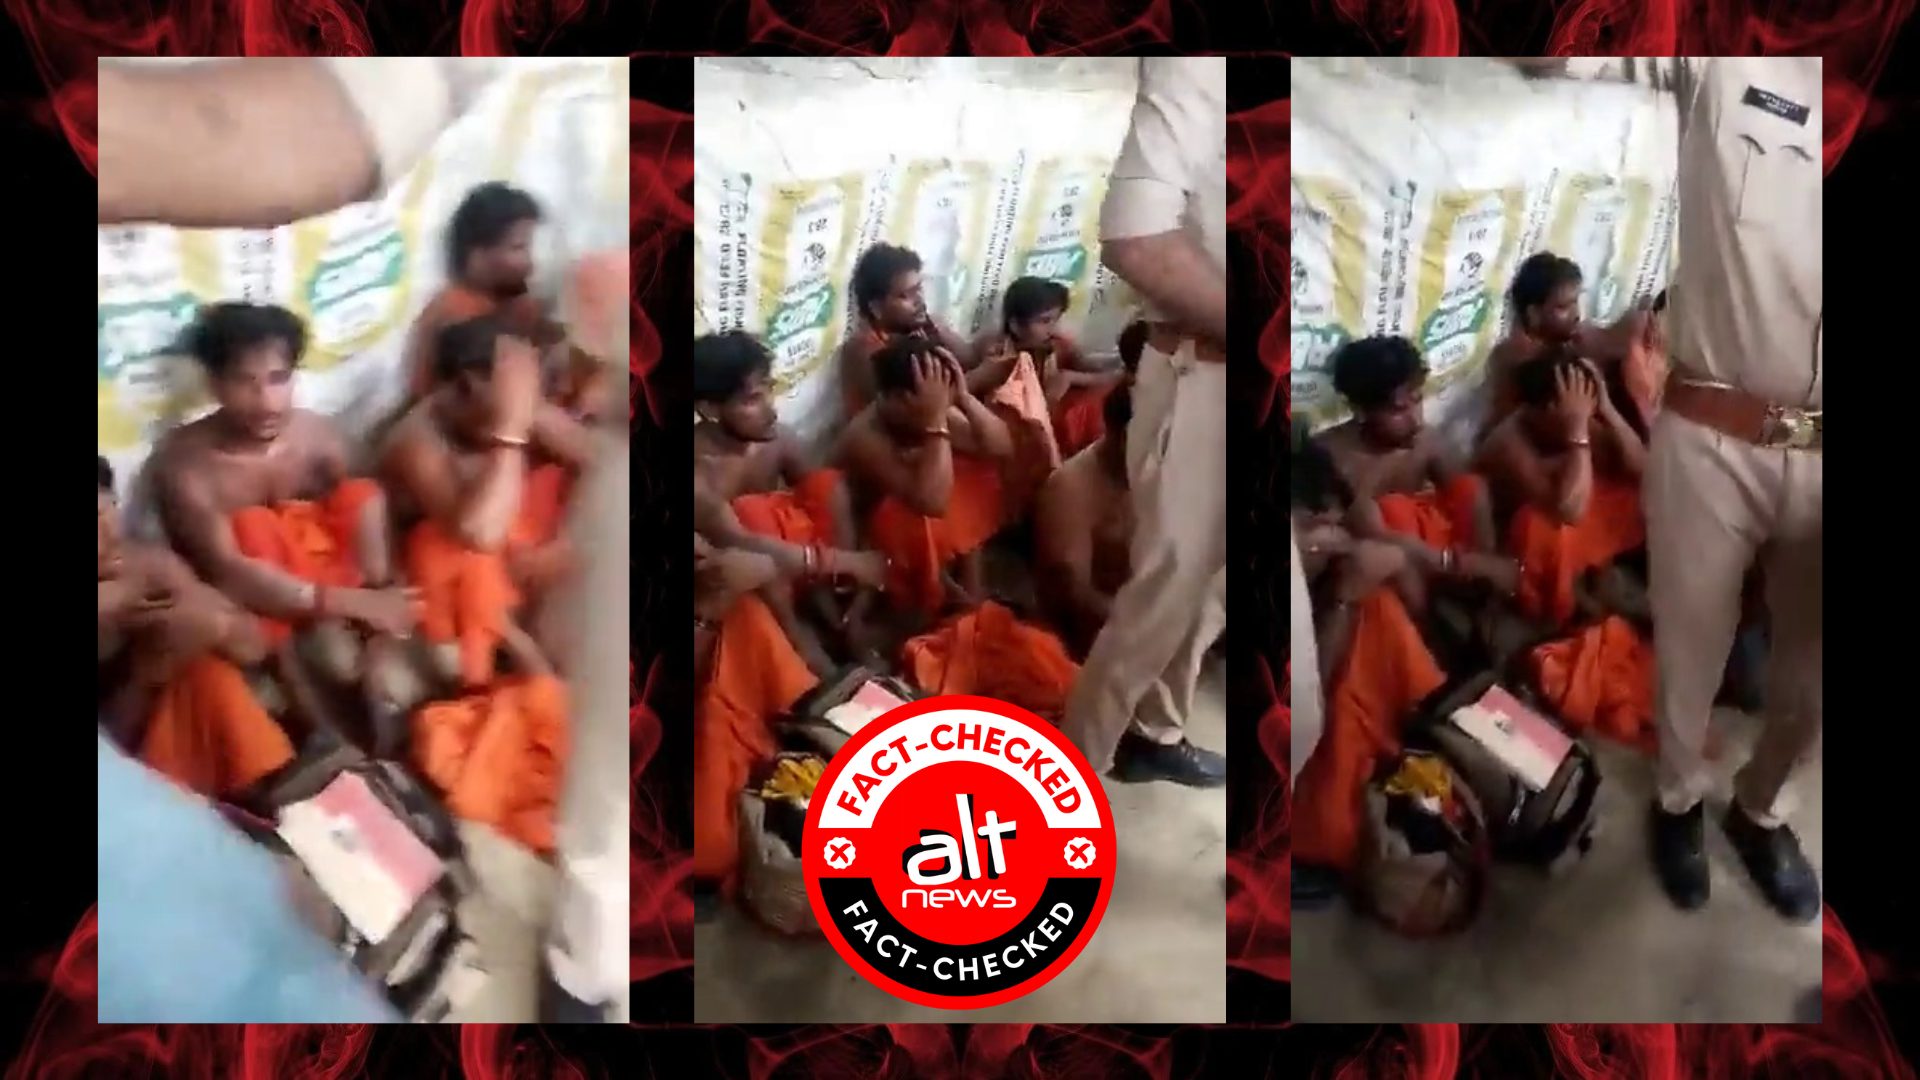 Video claiming arrest of 28 sadhus in Varanasi for child theft baseless, confirm police - Alt News